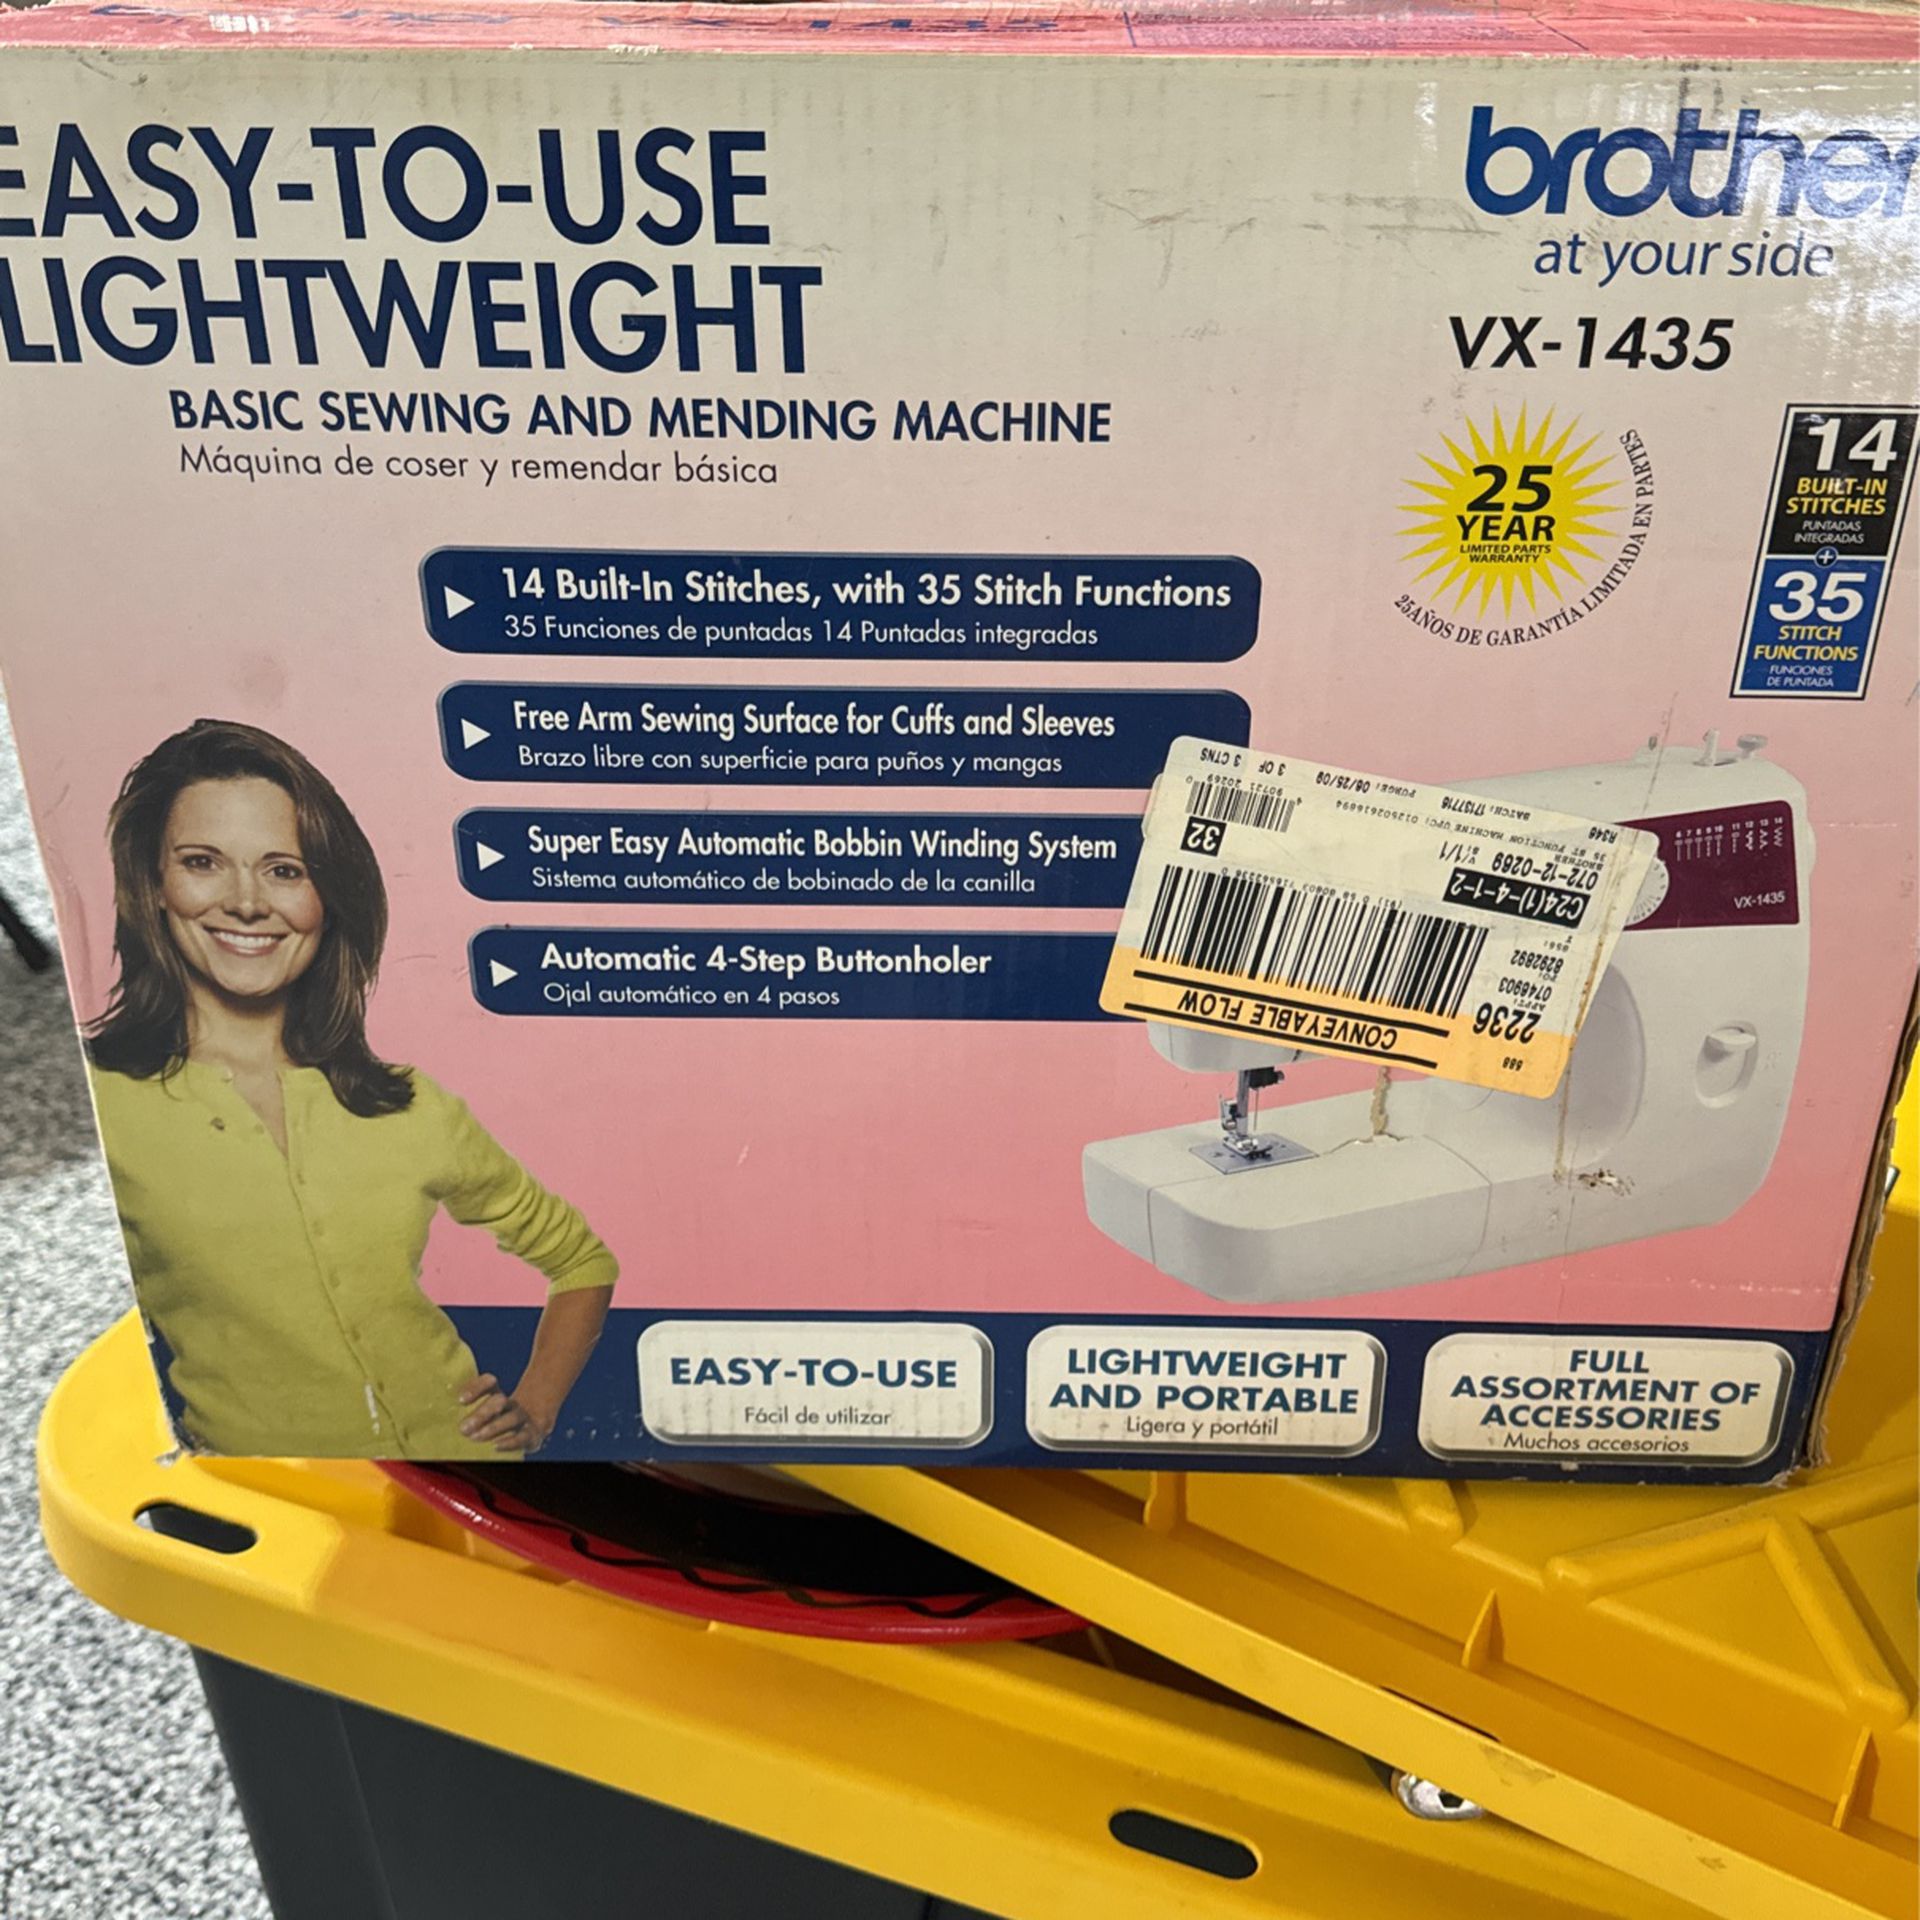 Brother VX-1445 Sewing Machine